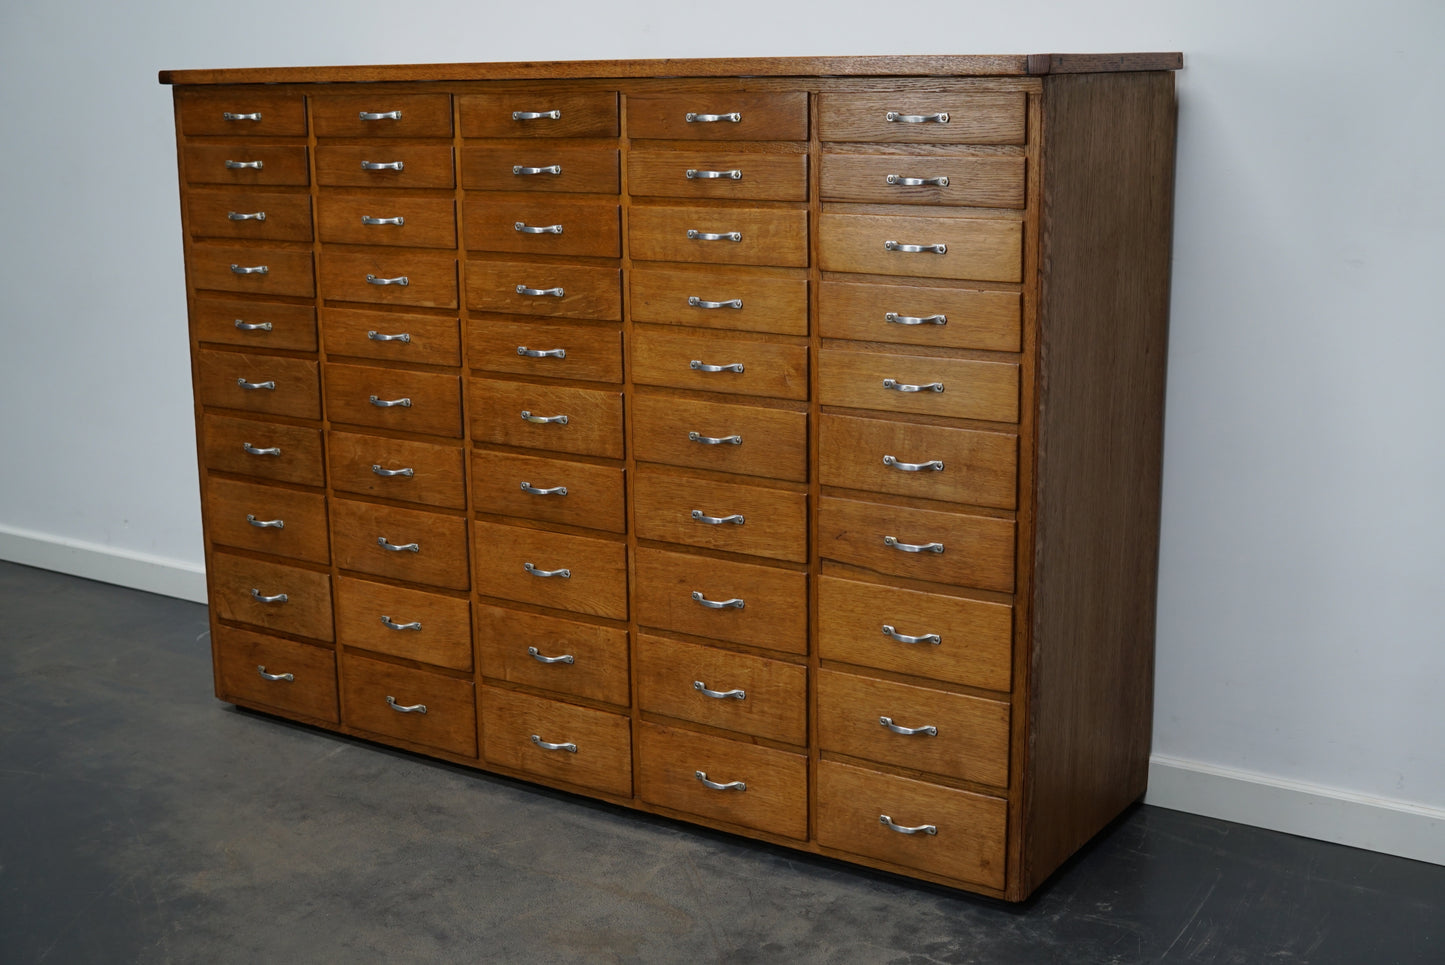 Dutch Industrial Oak Apothecary Cabinet, Mid-20th Century